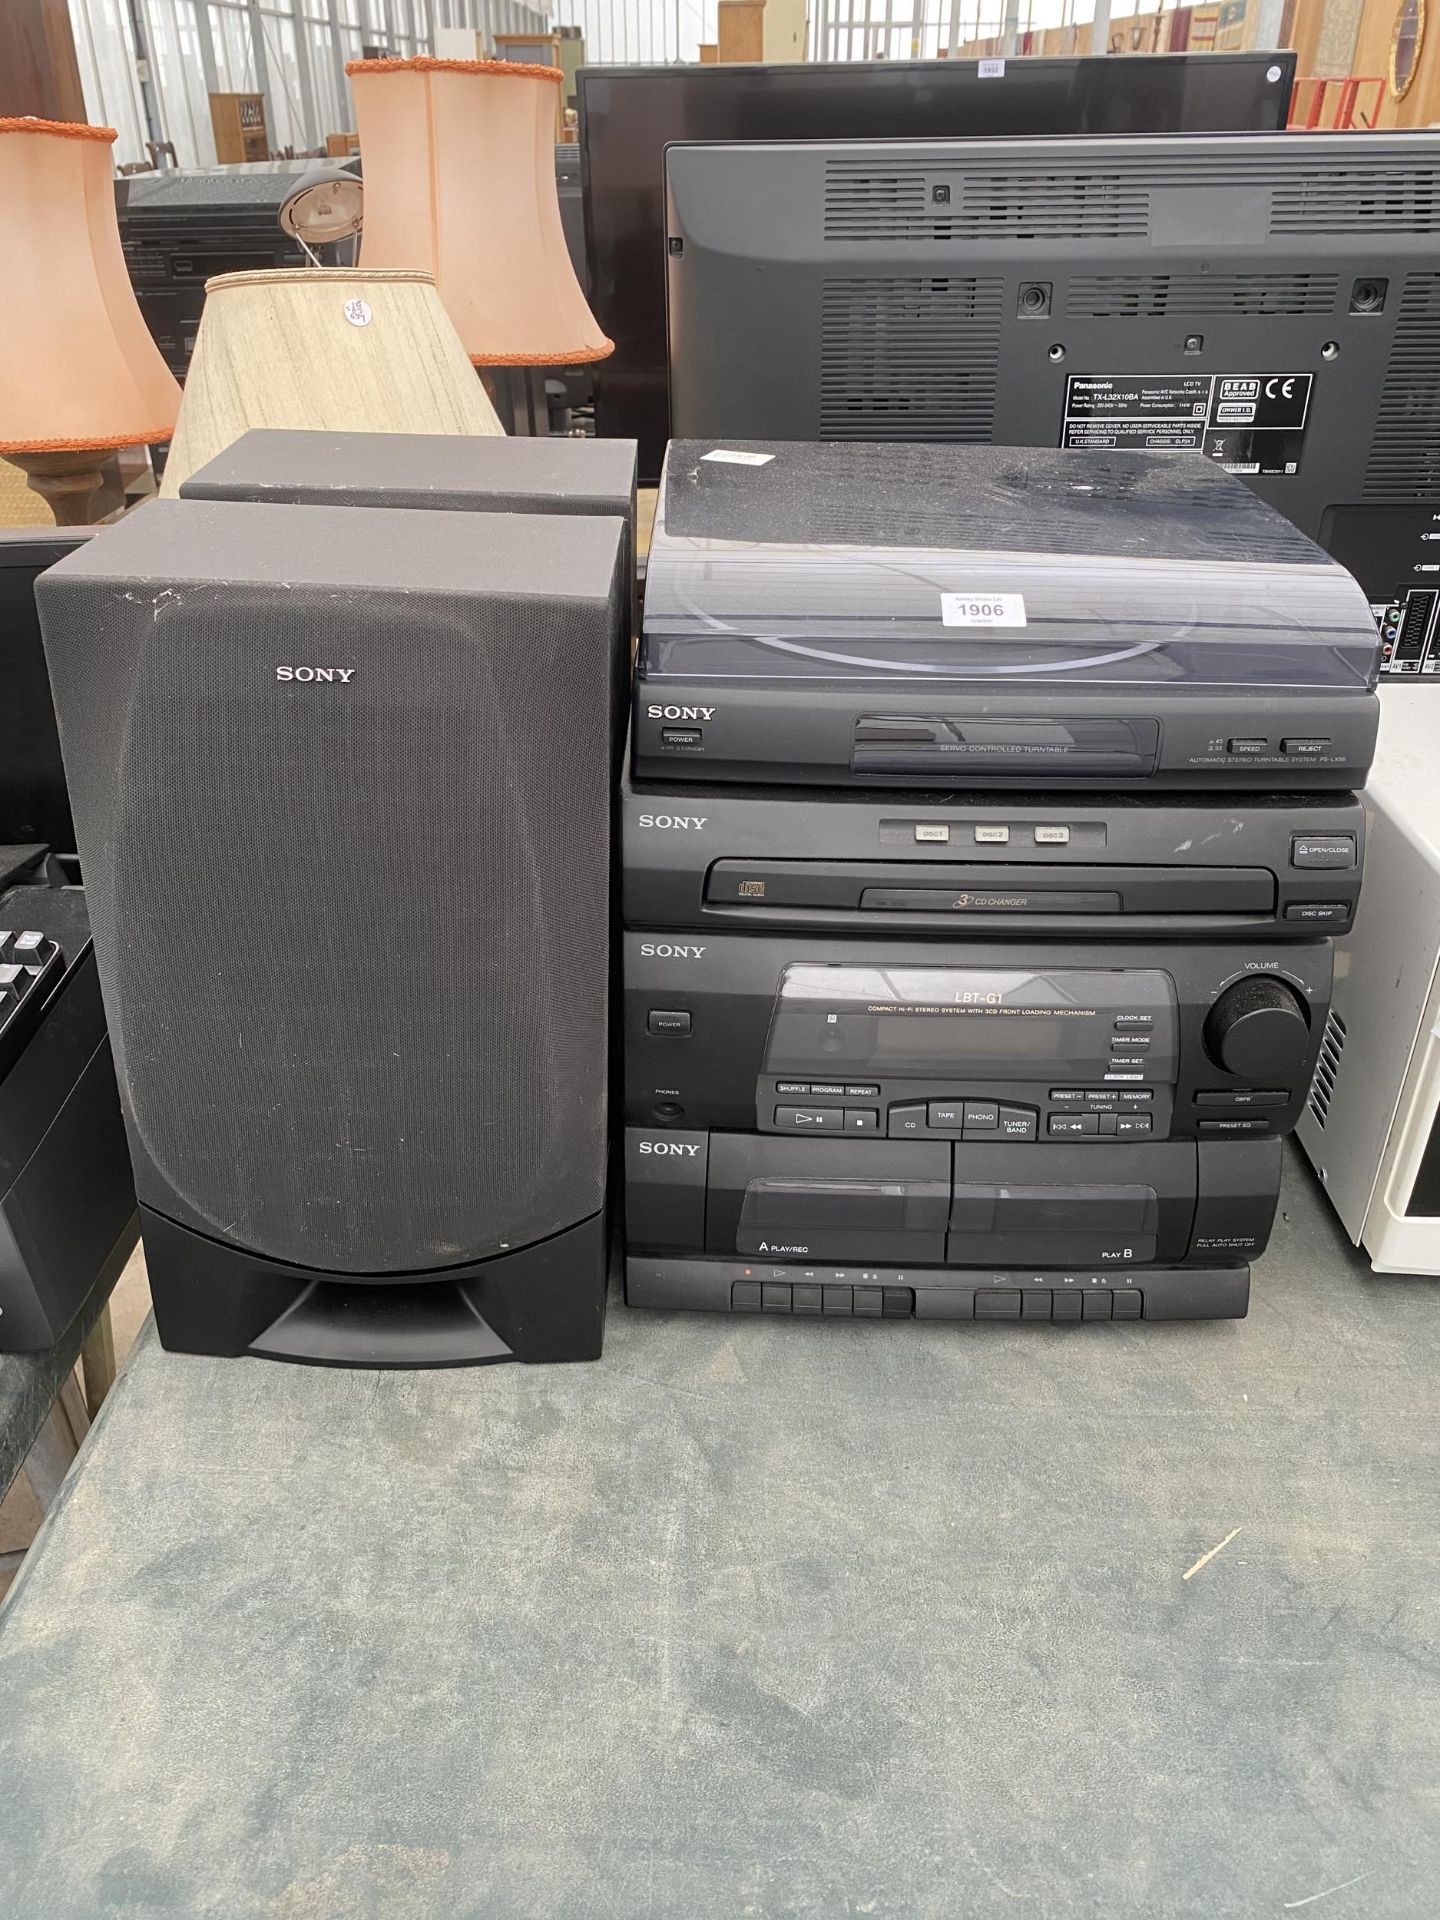 A SONY STEREO SYSTEM WITH RECORD PLAYER, THREE CD CHANGER, TAPE DECK AND TWO SPEAKERS